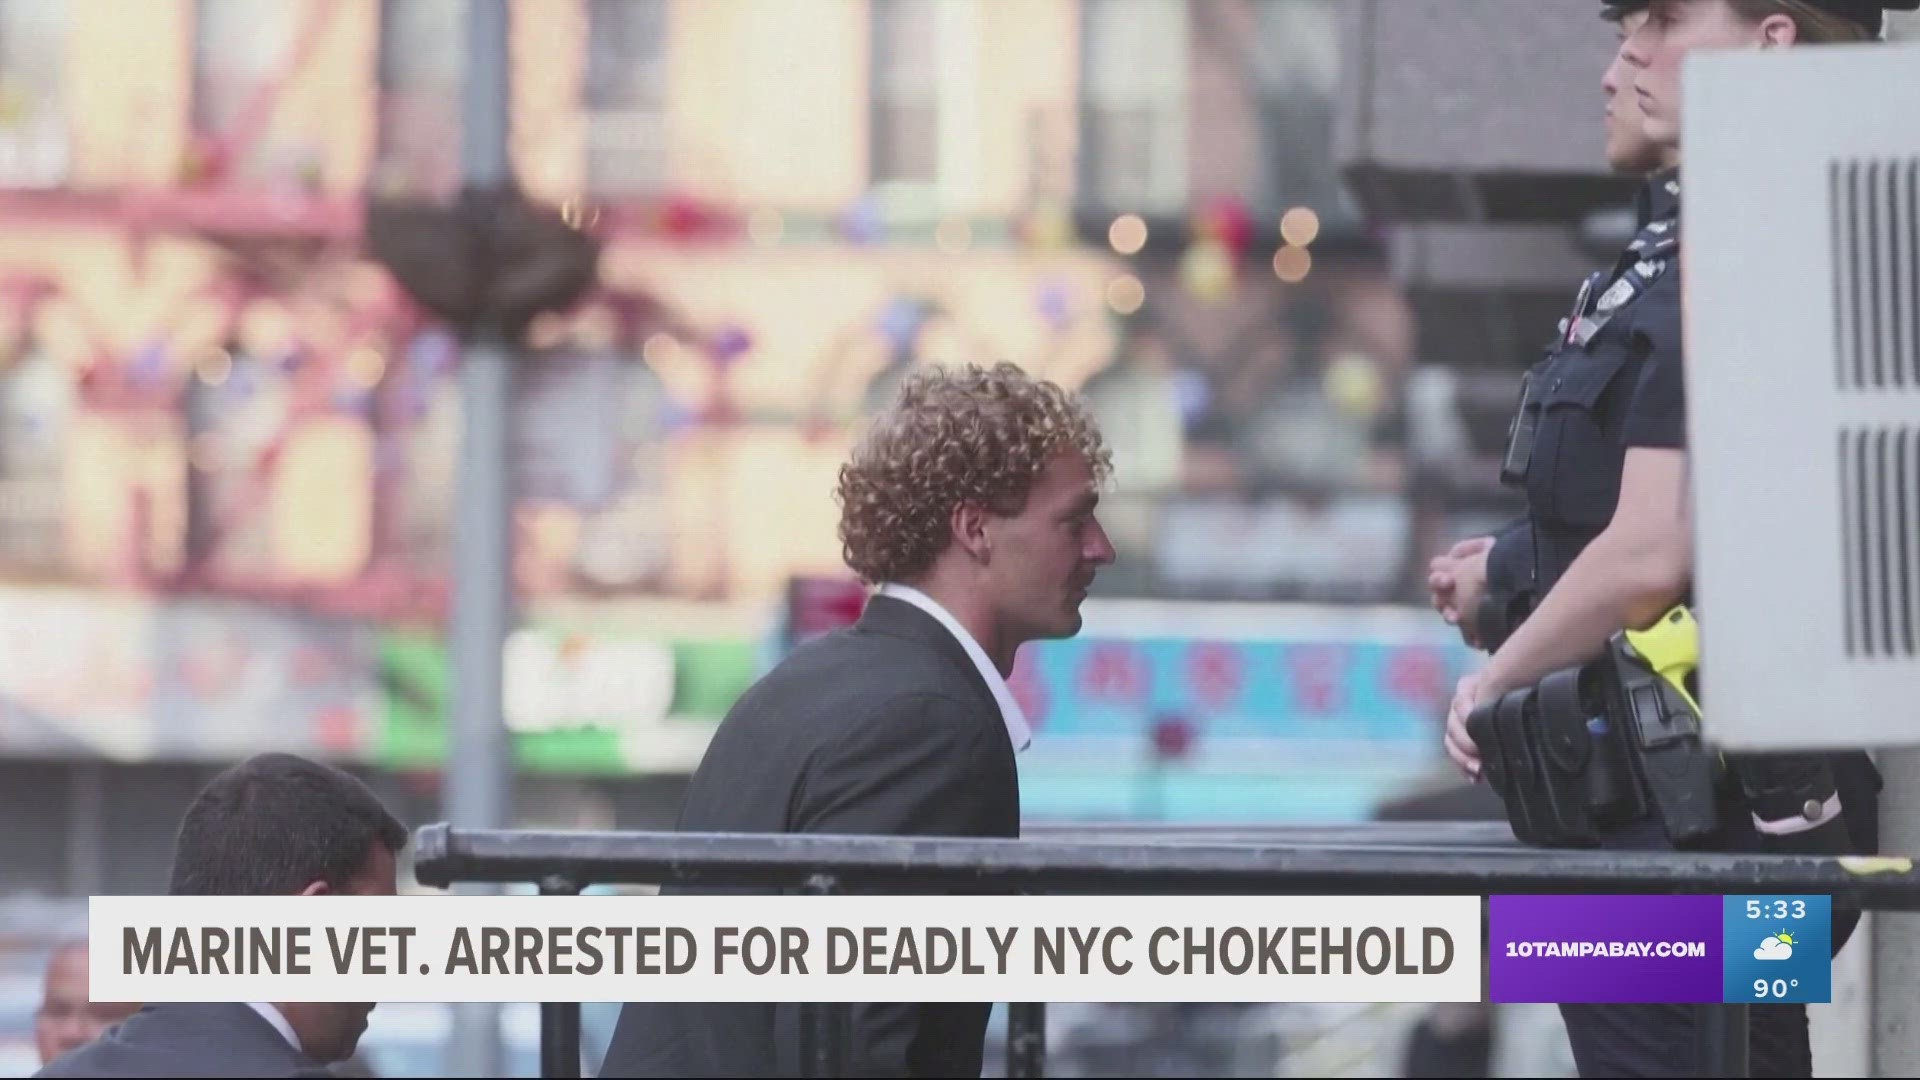 Charges in NYC chokehold death may hinge on 'reasonableness